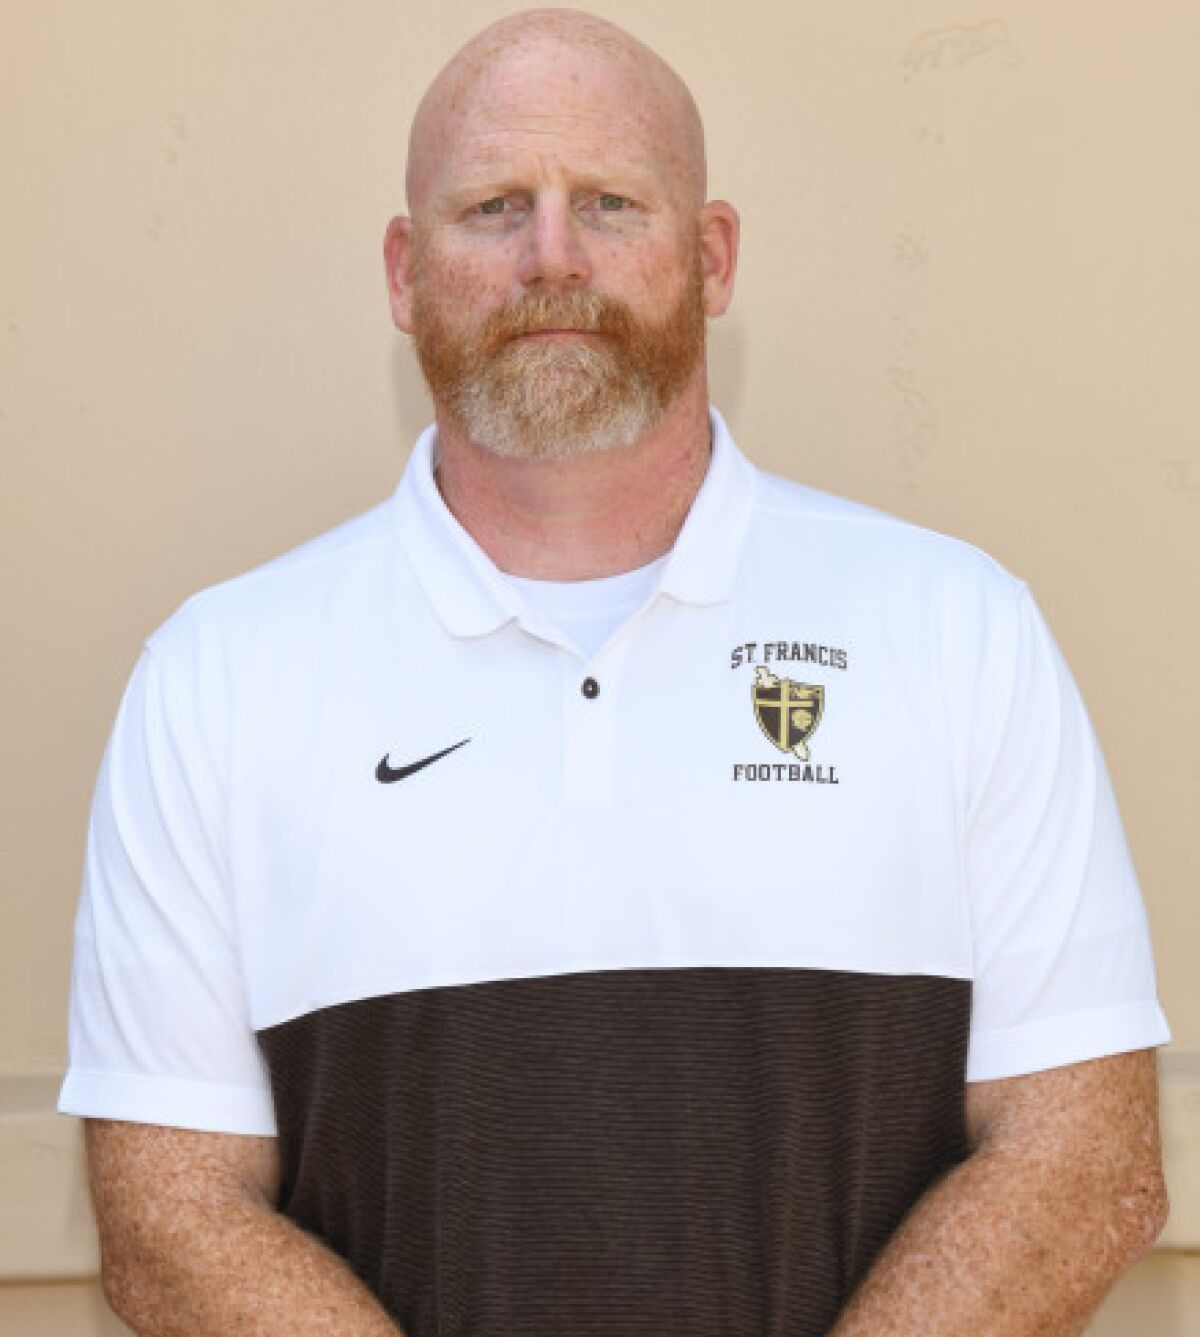 Ted Corcoran, a former head coach at Alemany and Chatsworth, will take over as interim coach at St. Francis.